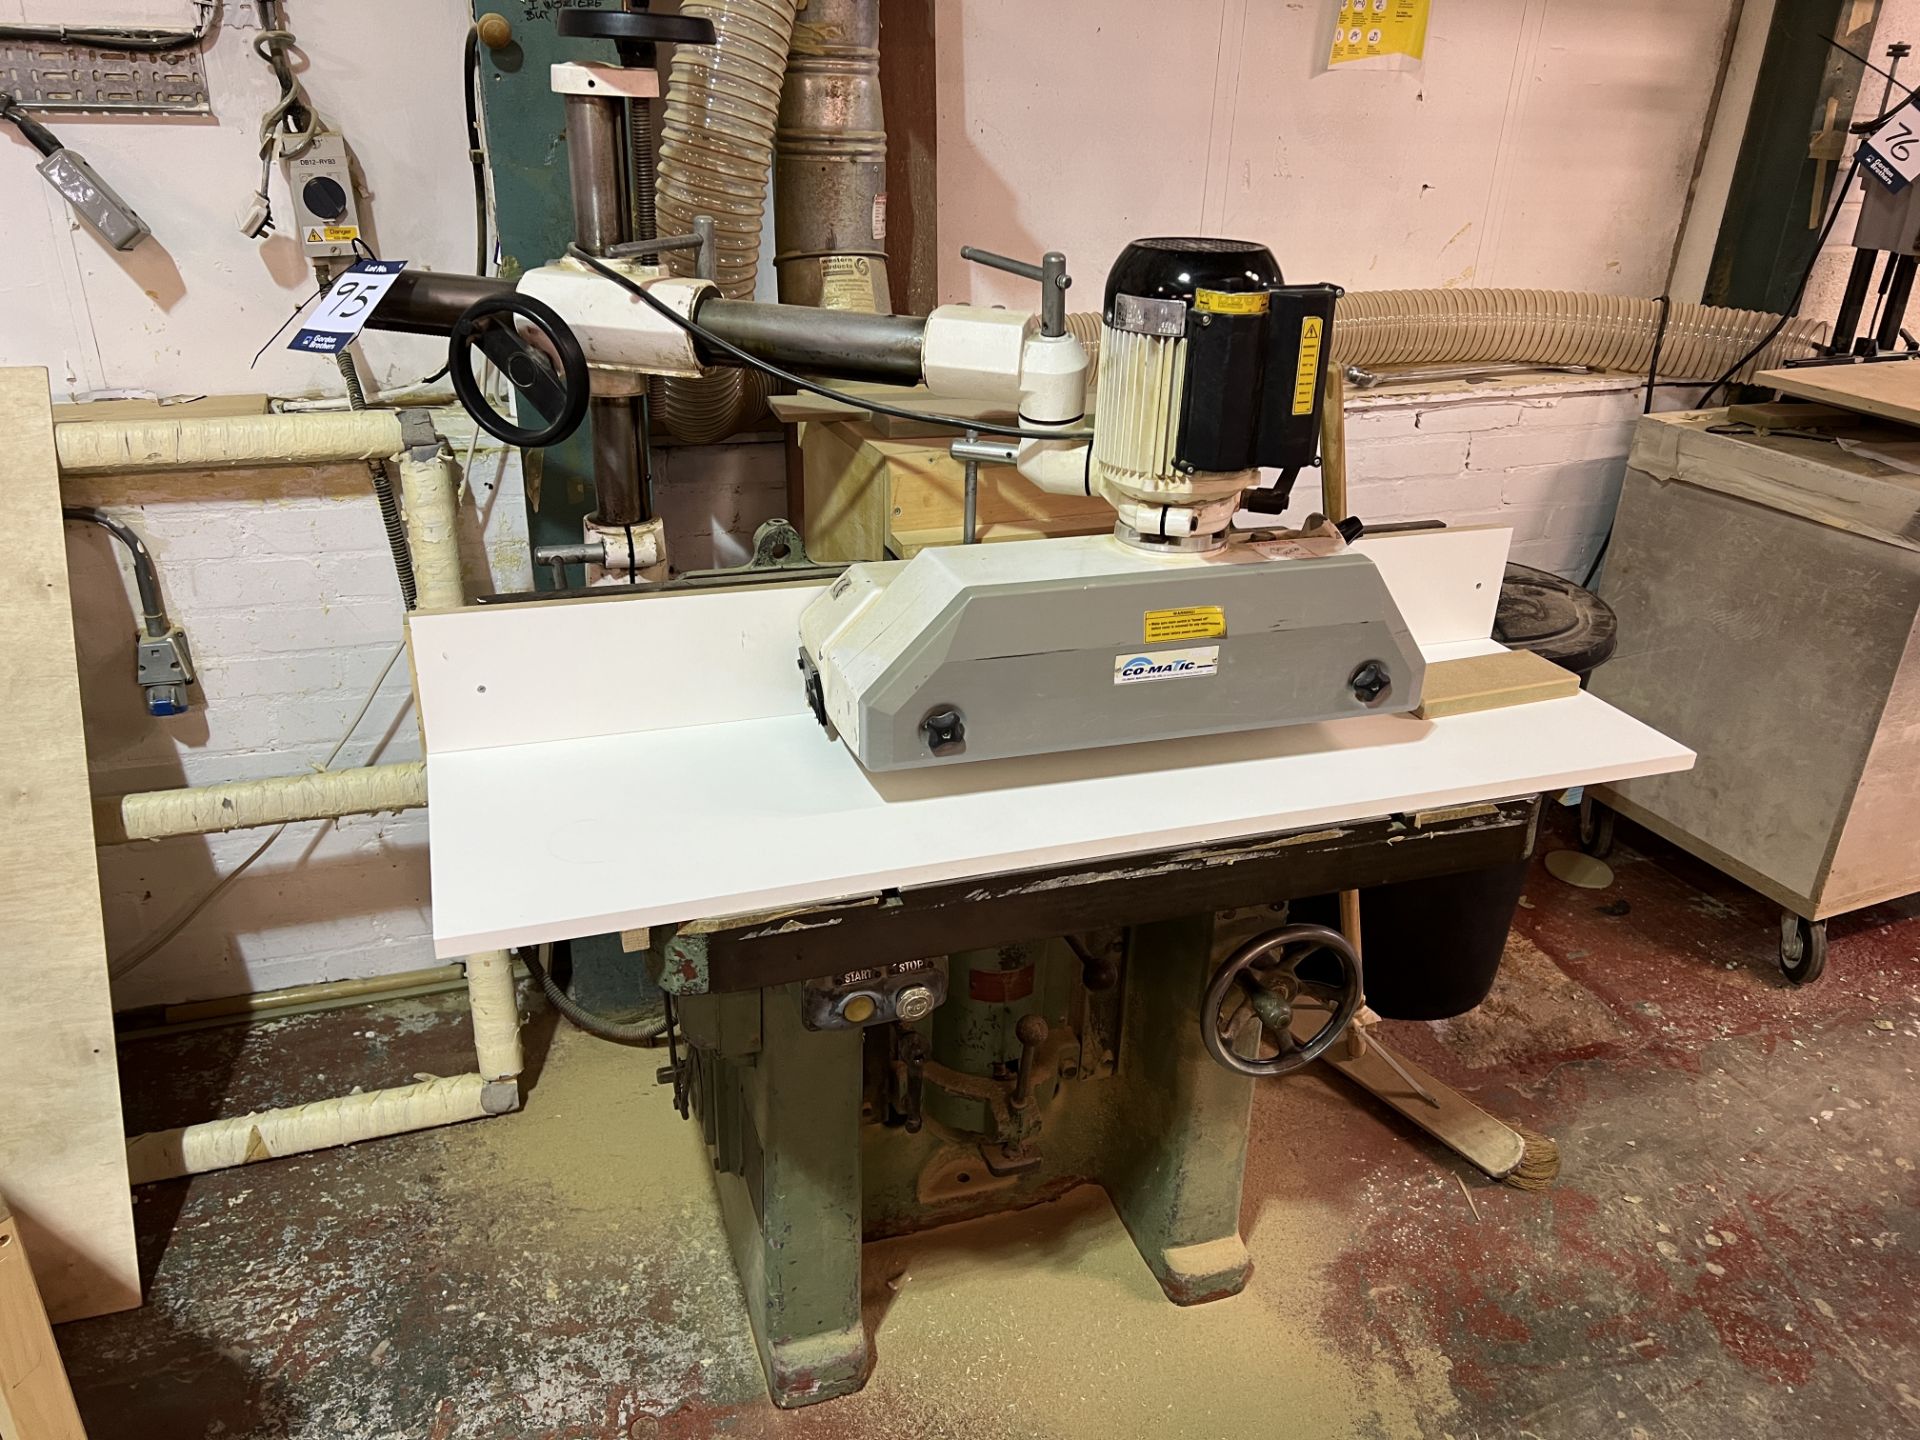 Wadkin SC1X spindle moulder fitted with Co-Matic AF48 powered feeder head 380-440 volts, S/No.